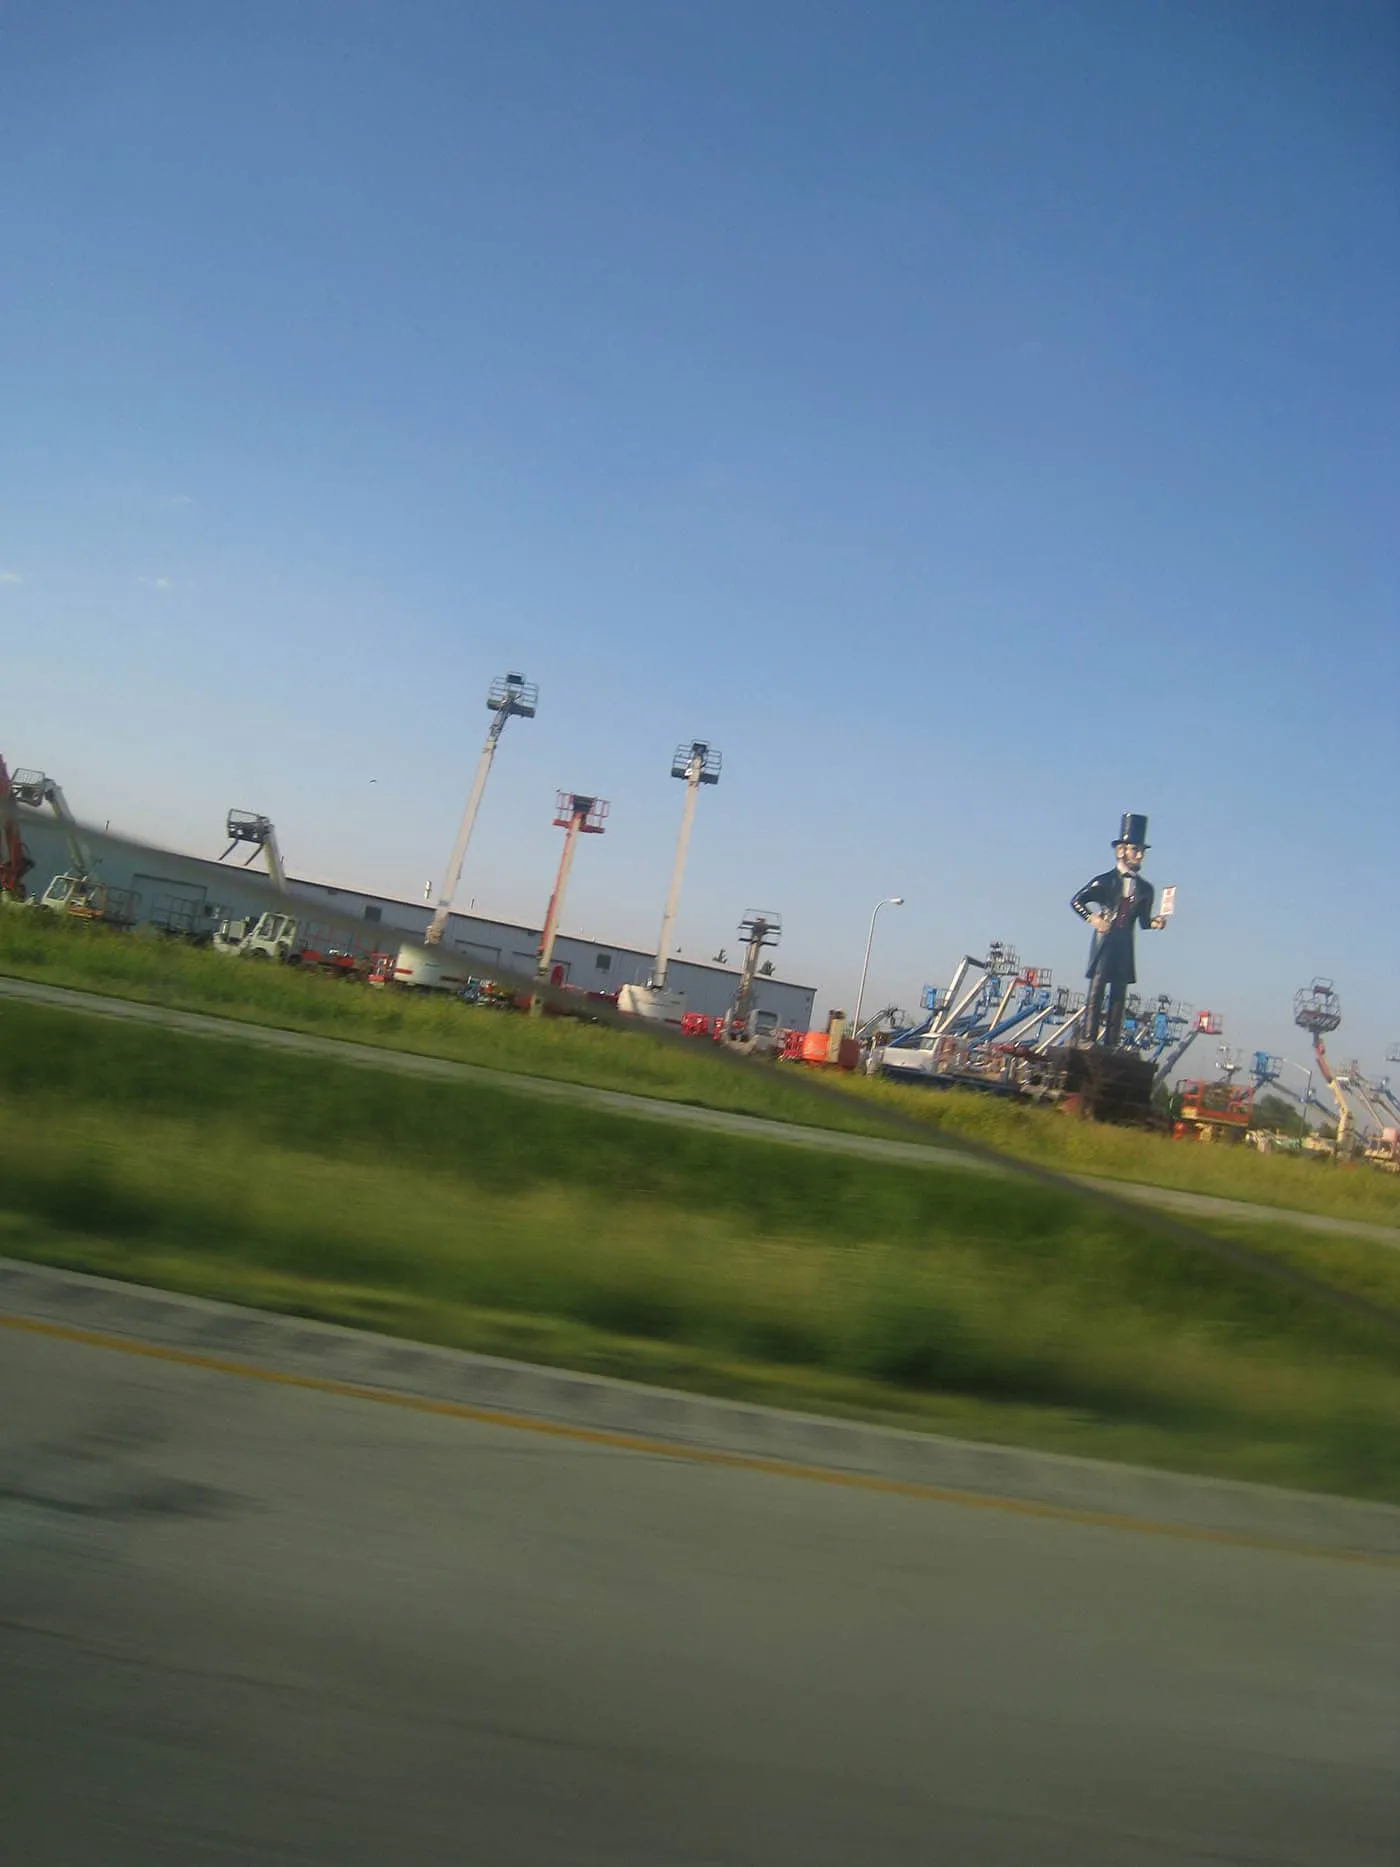 Giant Abraham Lincoln statue off of I-57 in Kankakee, Illinois.